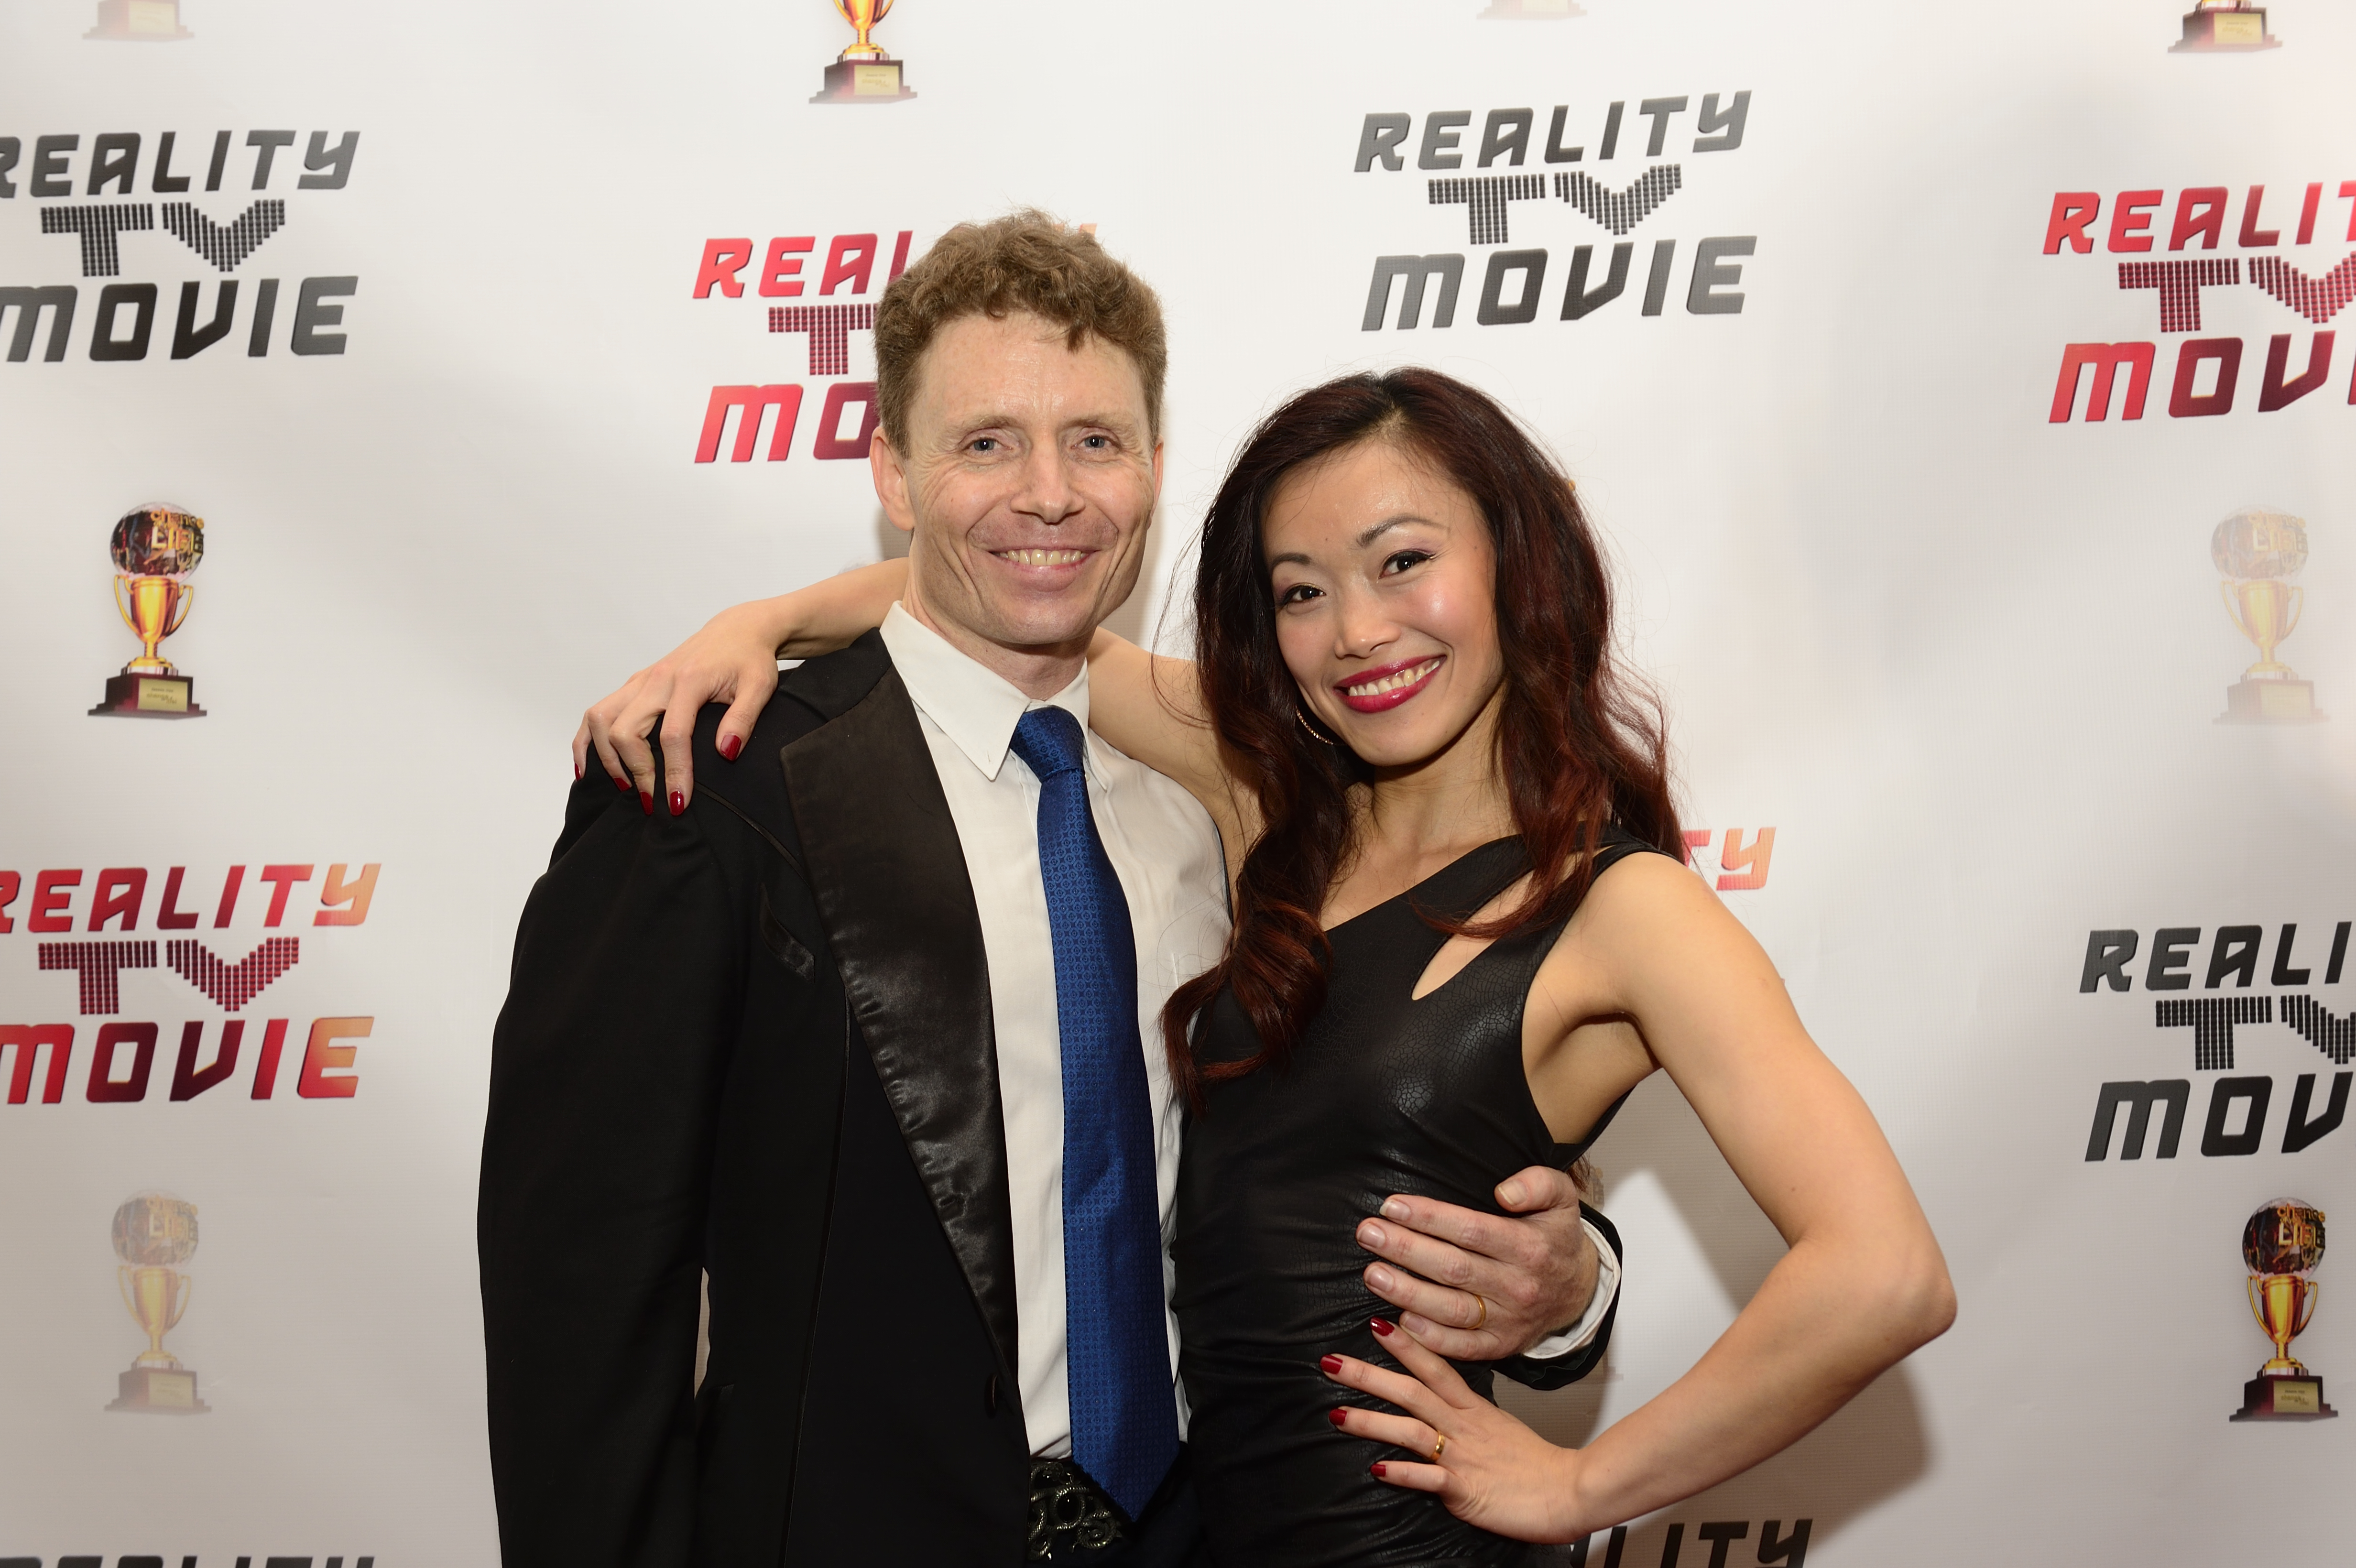 Tytus Bergstrom and Li Wen Ang at the Reality TV Movie premiere